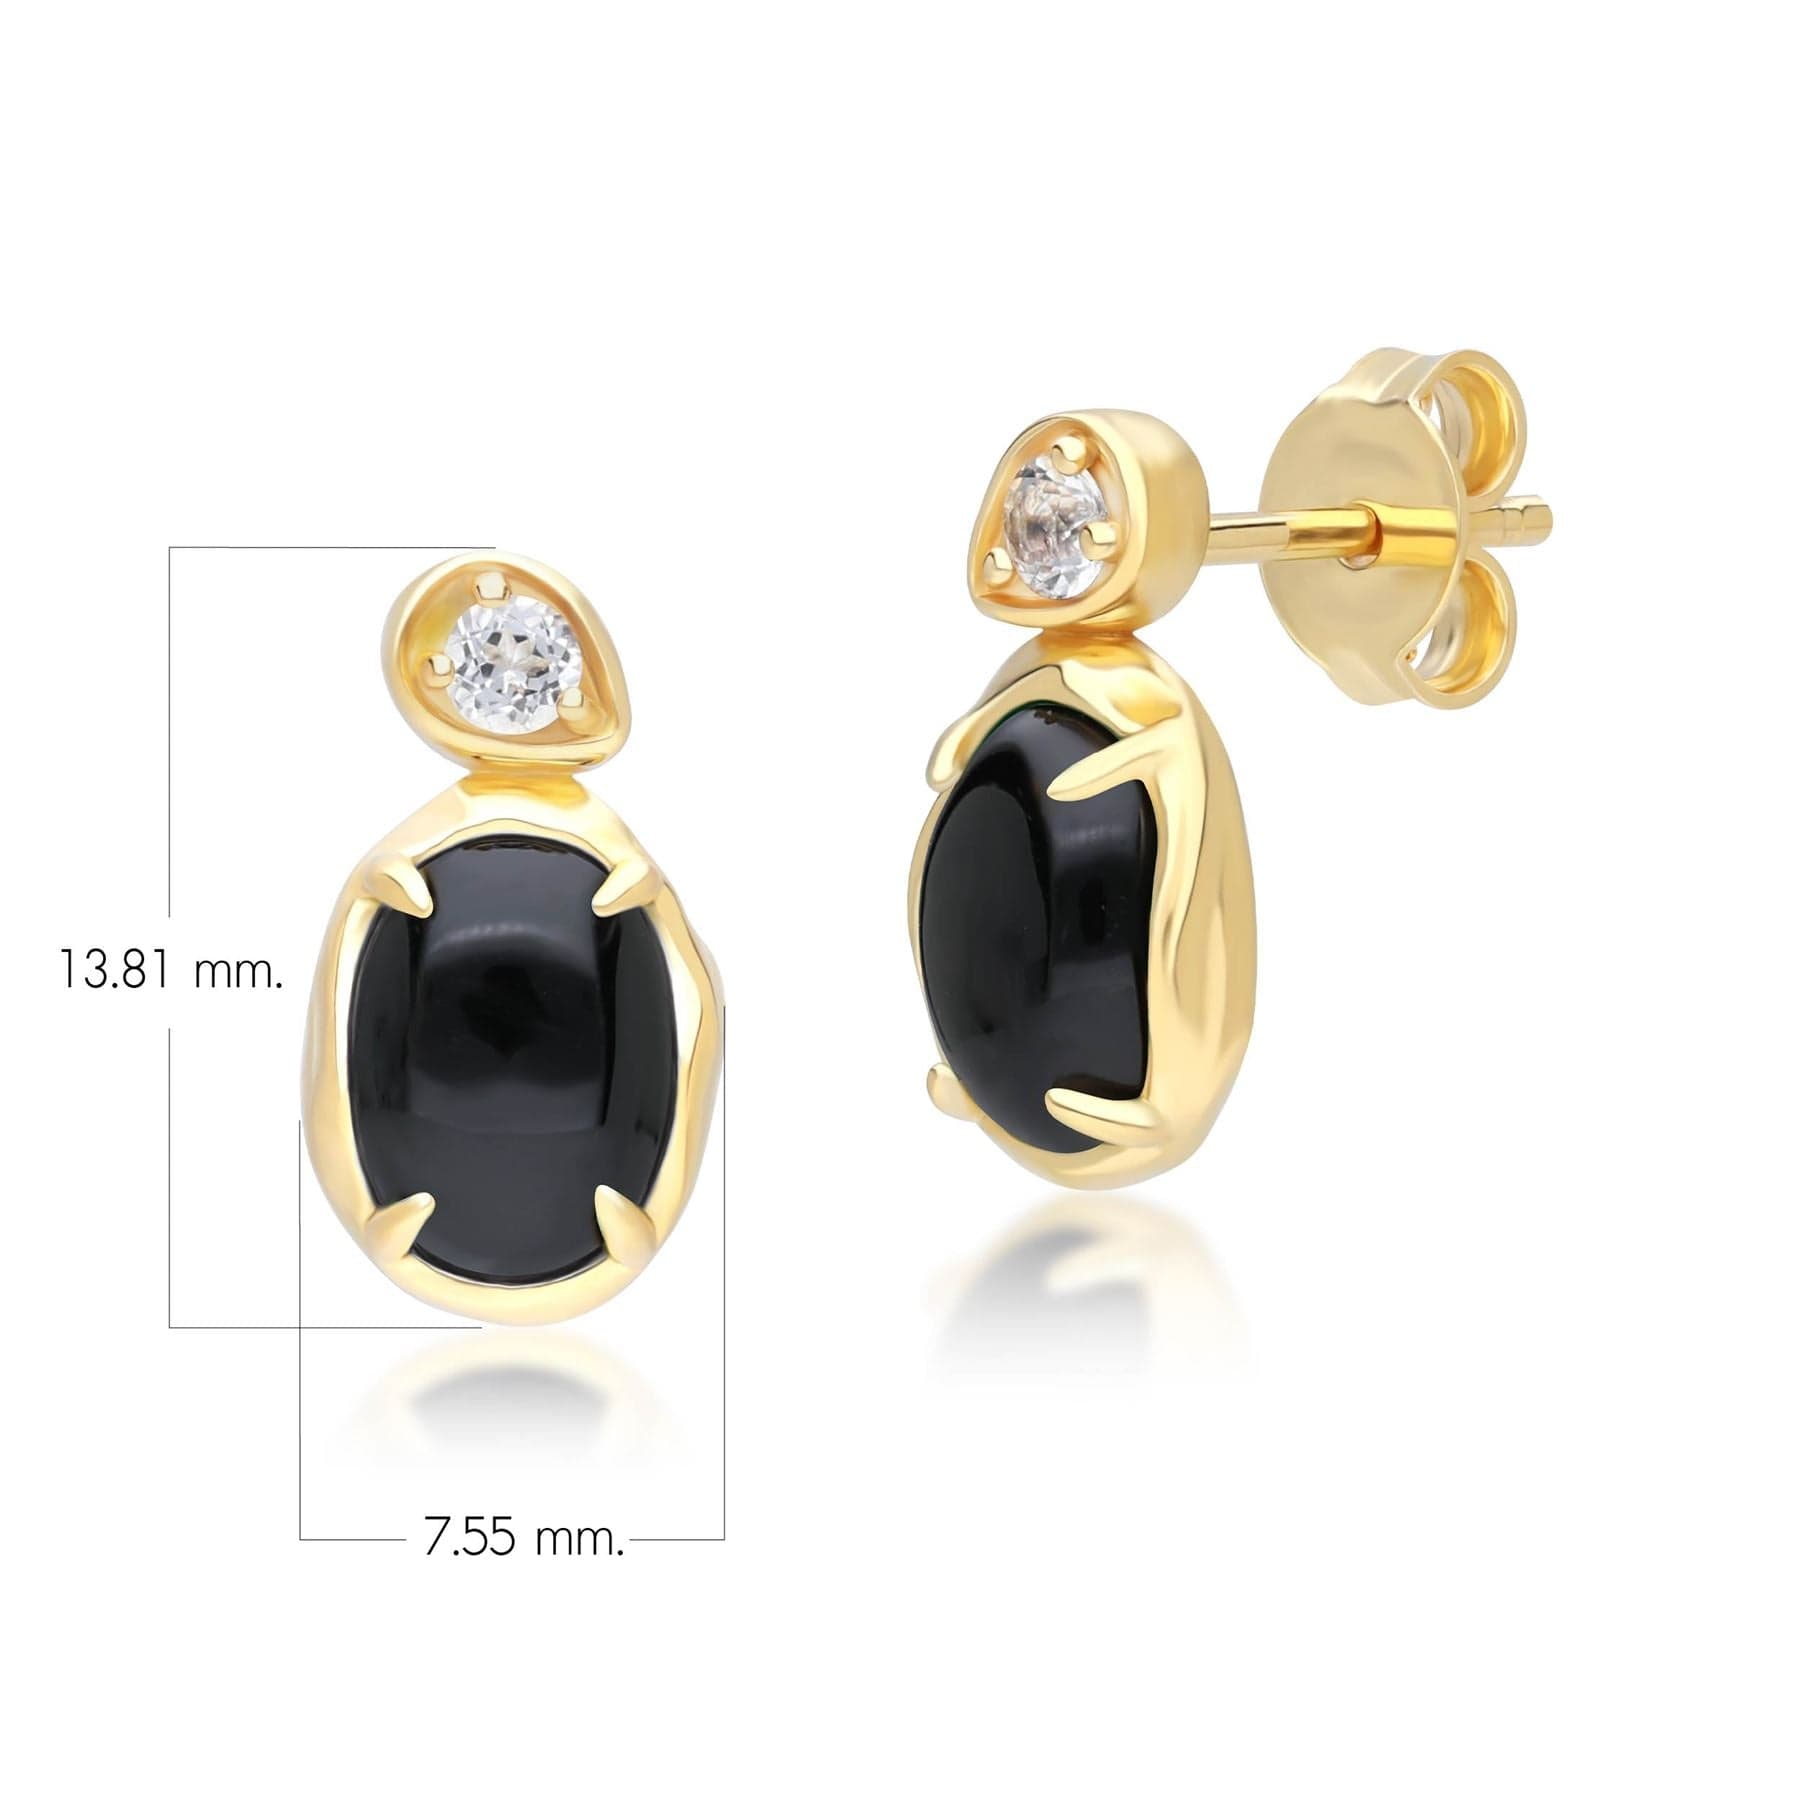 253E418803925 Irregular Oval Black Onyx & Topaz Drop Earrings In 18ct Gold Plated SterlIng Silver Dimensions